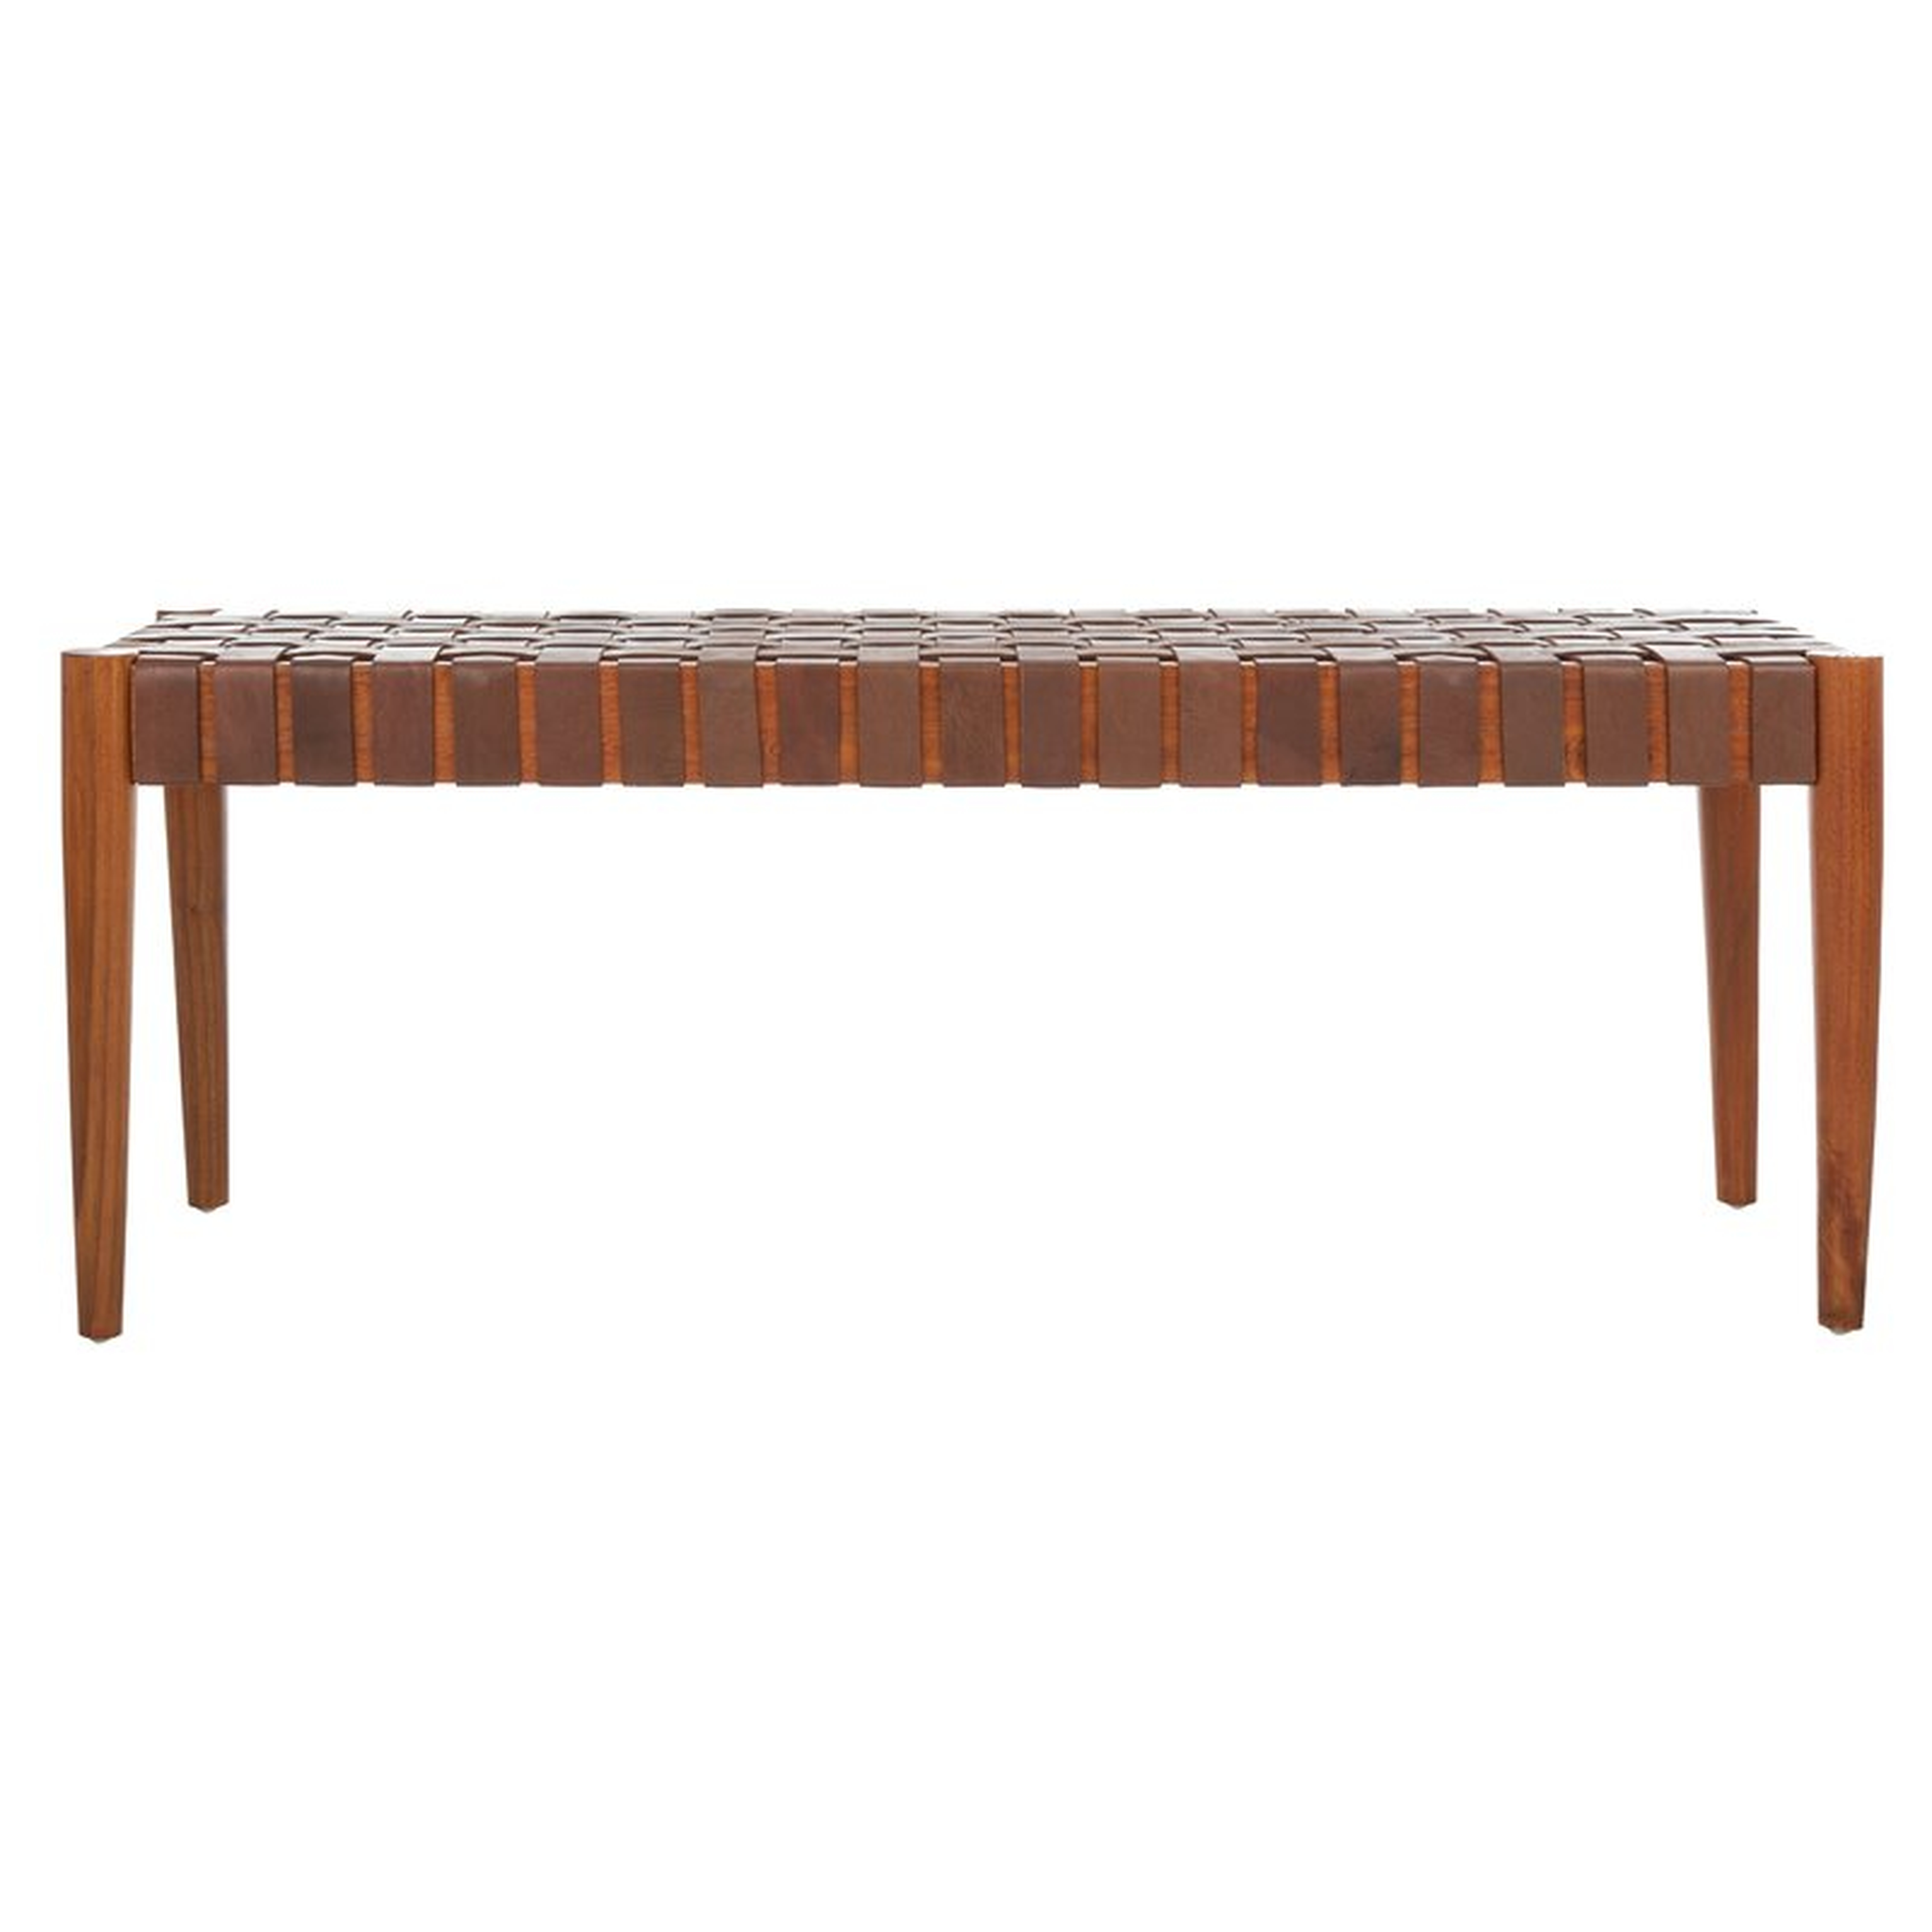 Albanese Leather Bench - Brown - AllModern